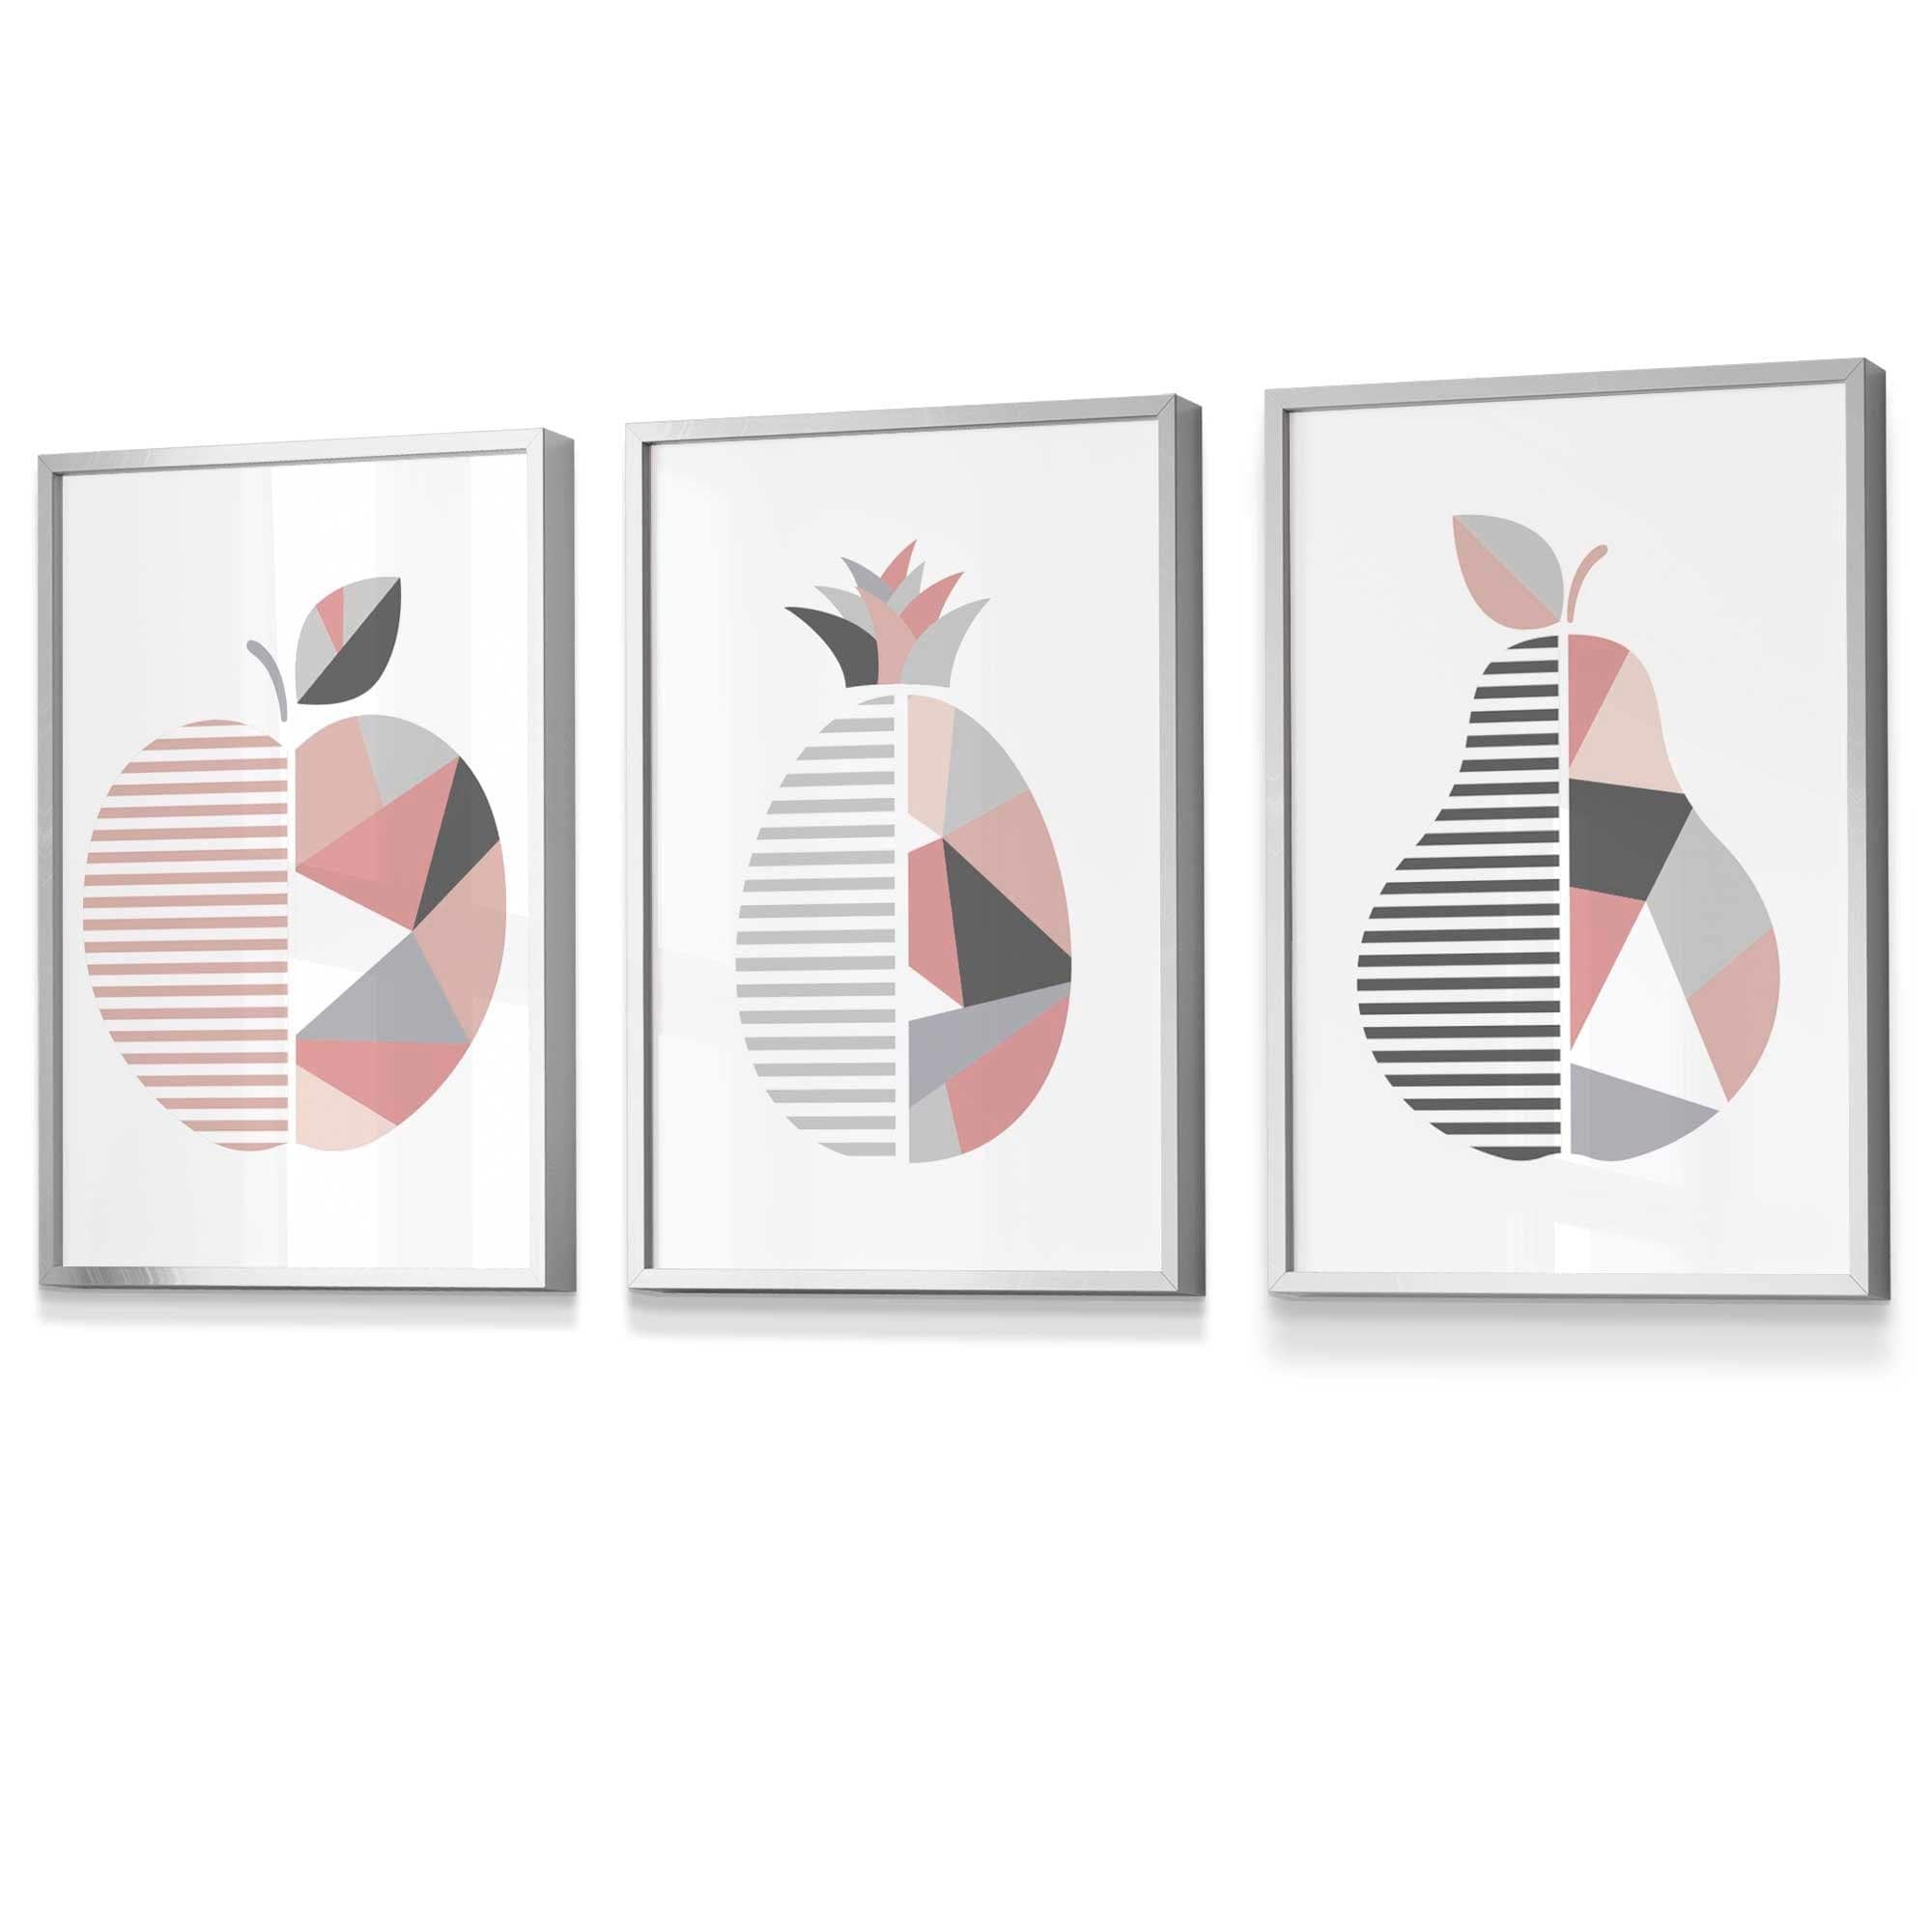 Set of 3 FRAMED Blush Pink and Grey Geometric Line Wall Art Fruit Featuring Apple Pear and Pineapple